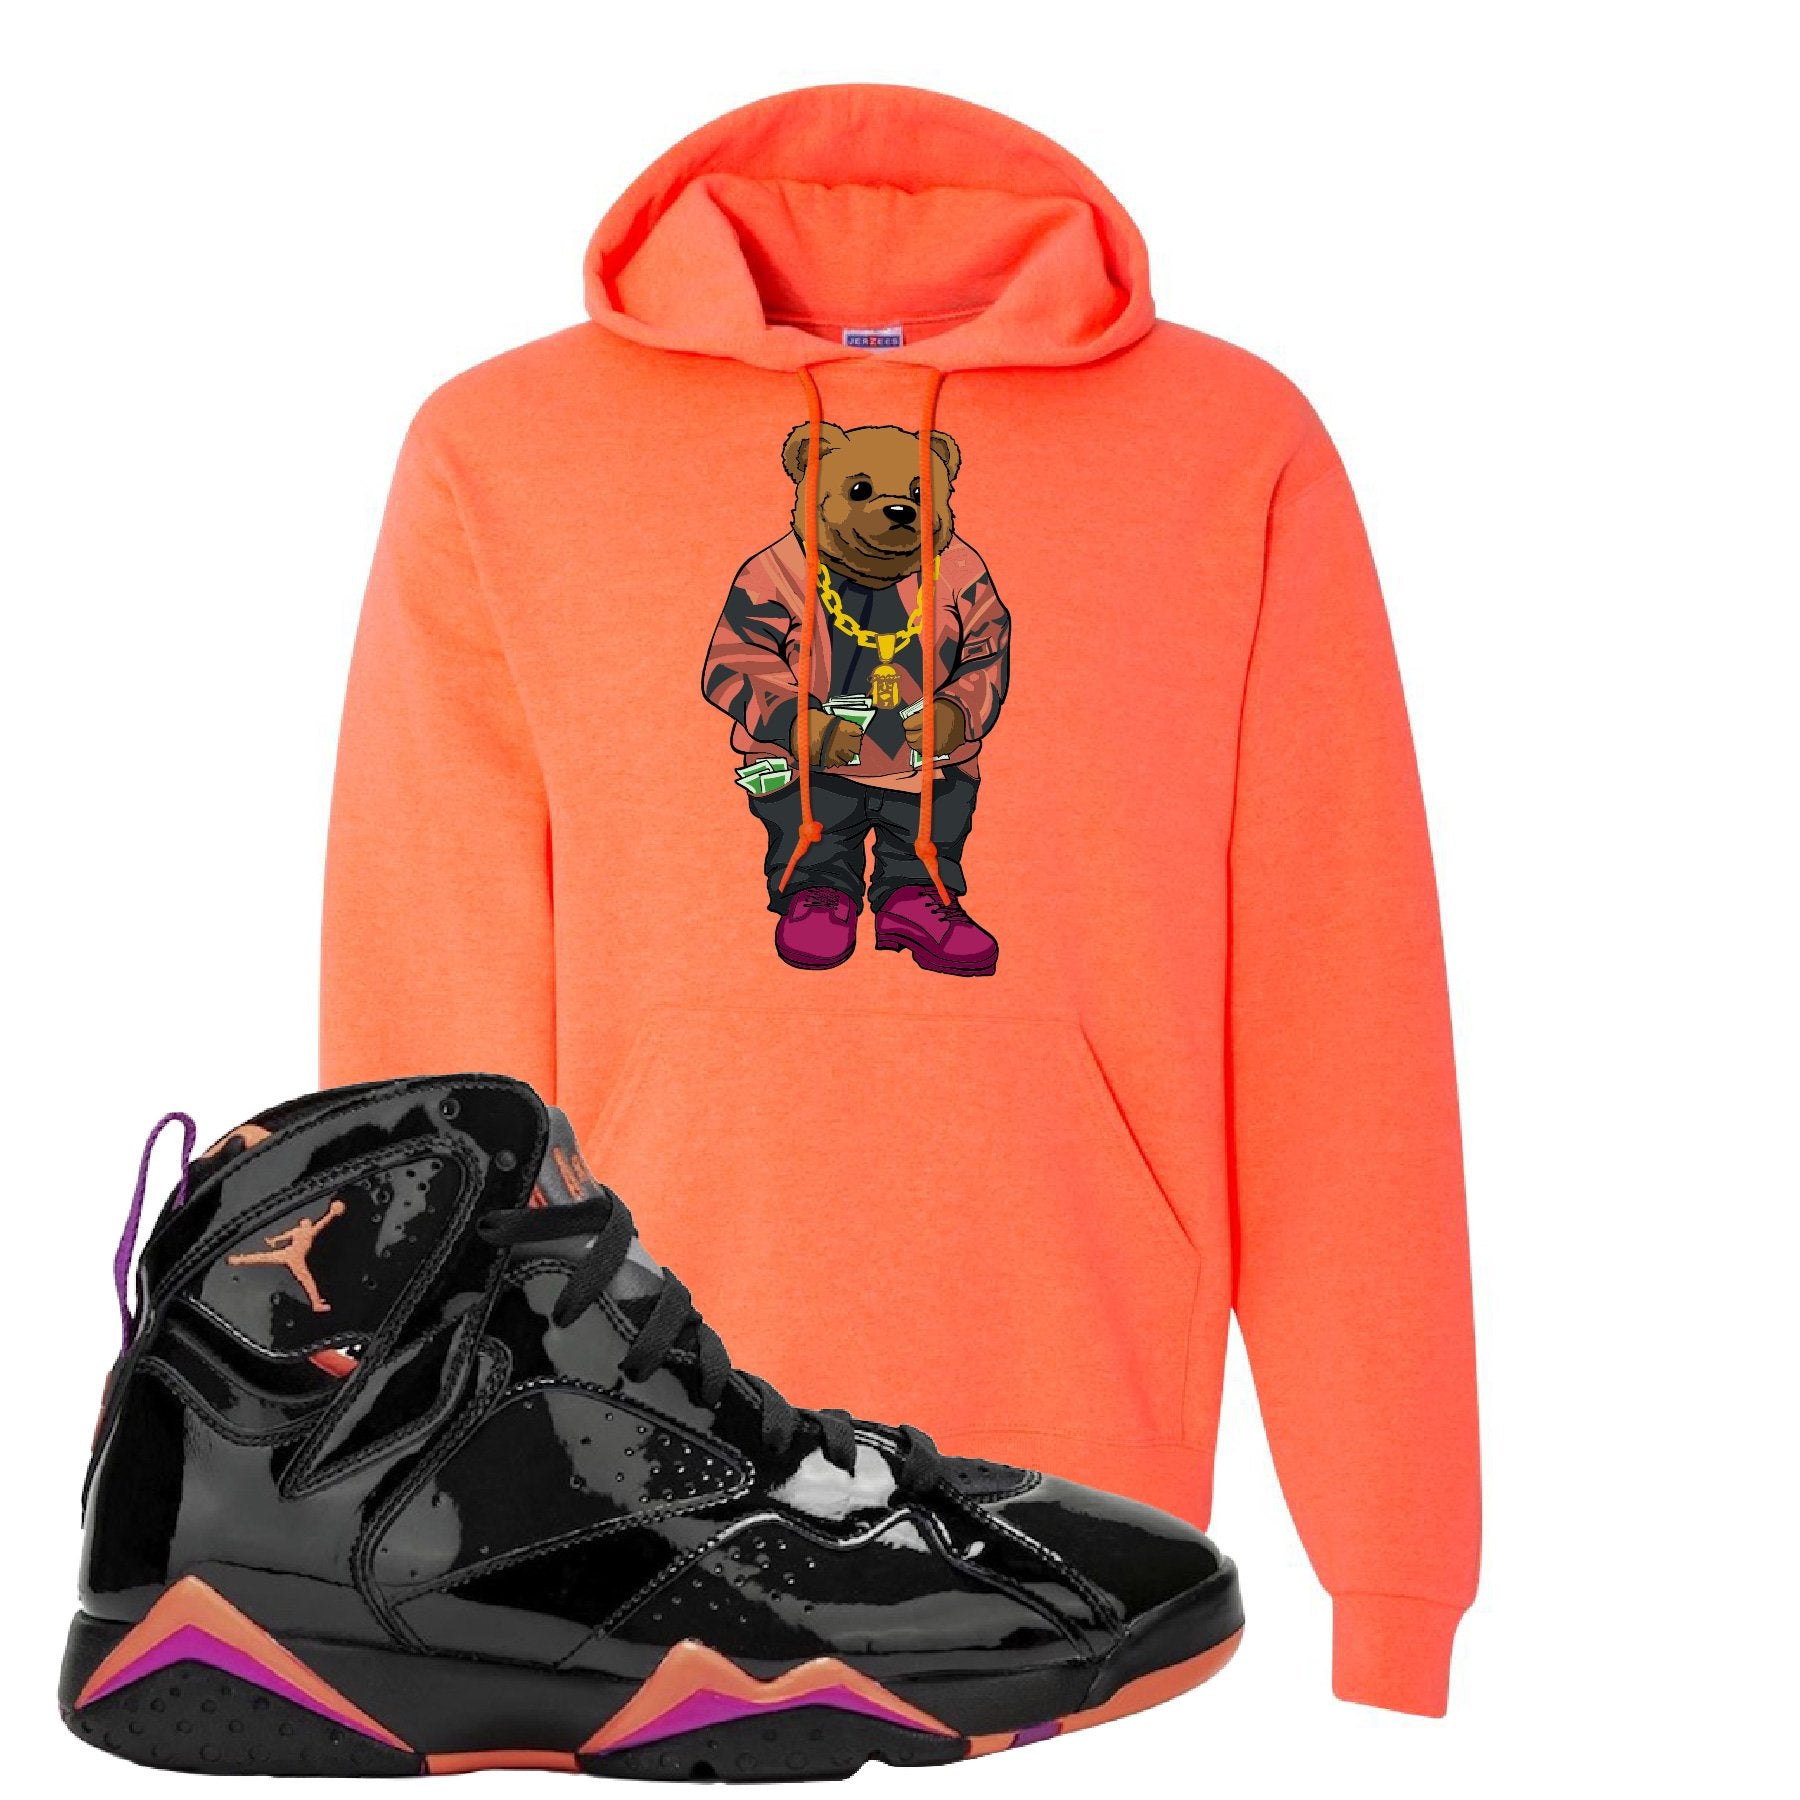 Jordan 7 WMNS Black Patent Leather Sweater Bear Retro Heather Coral Sneaker Hook Up Pullover Hoodie